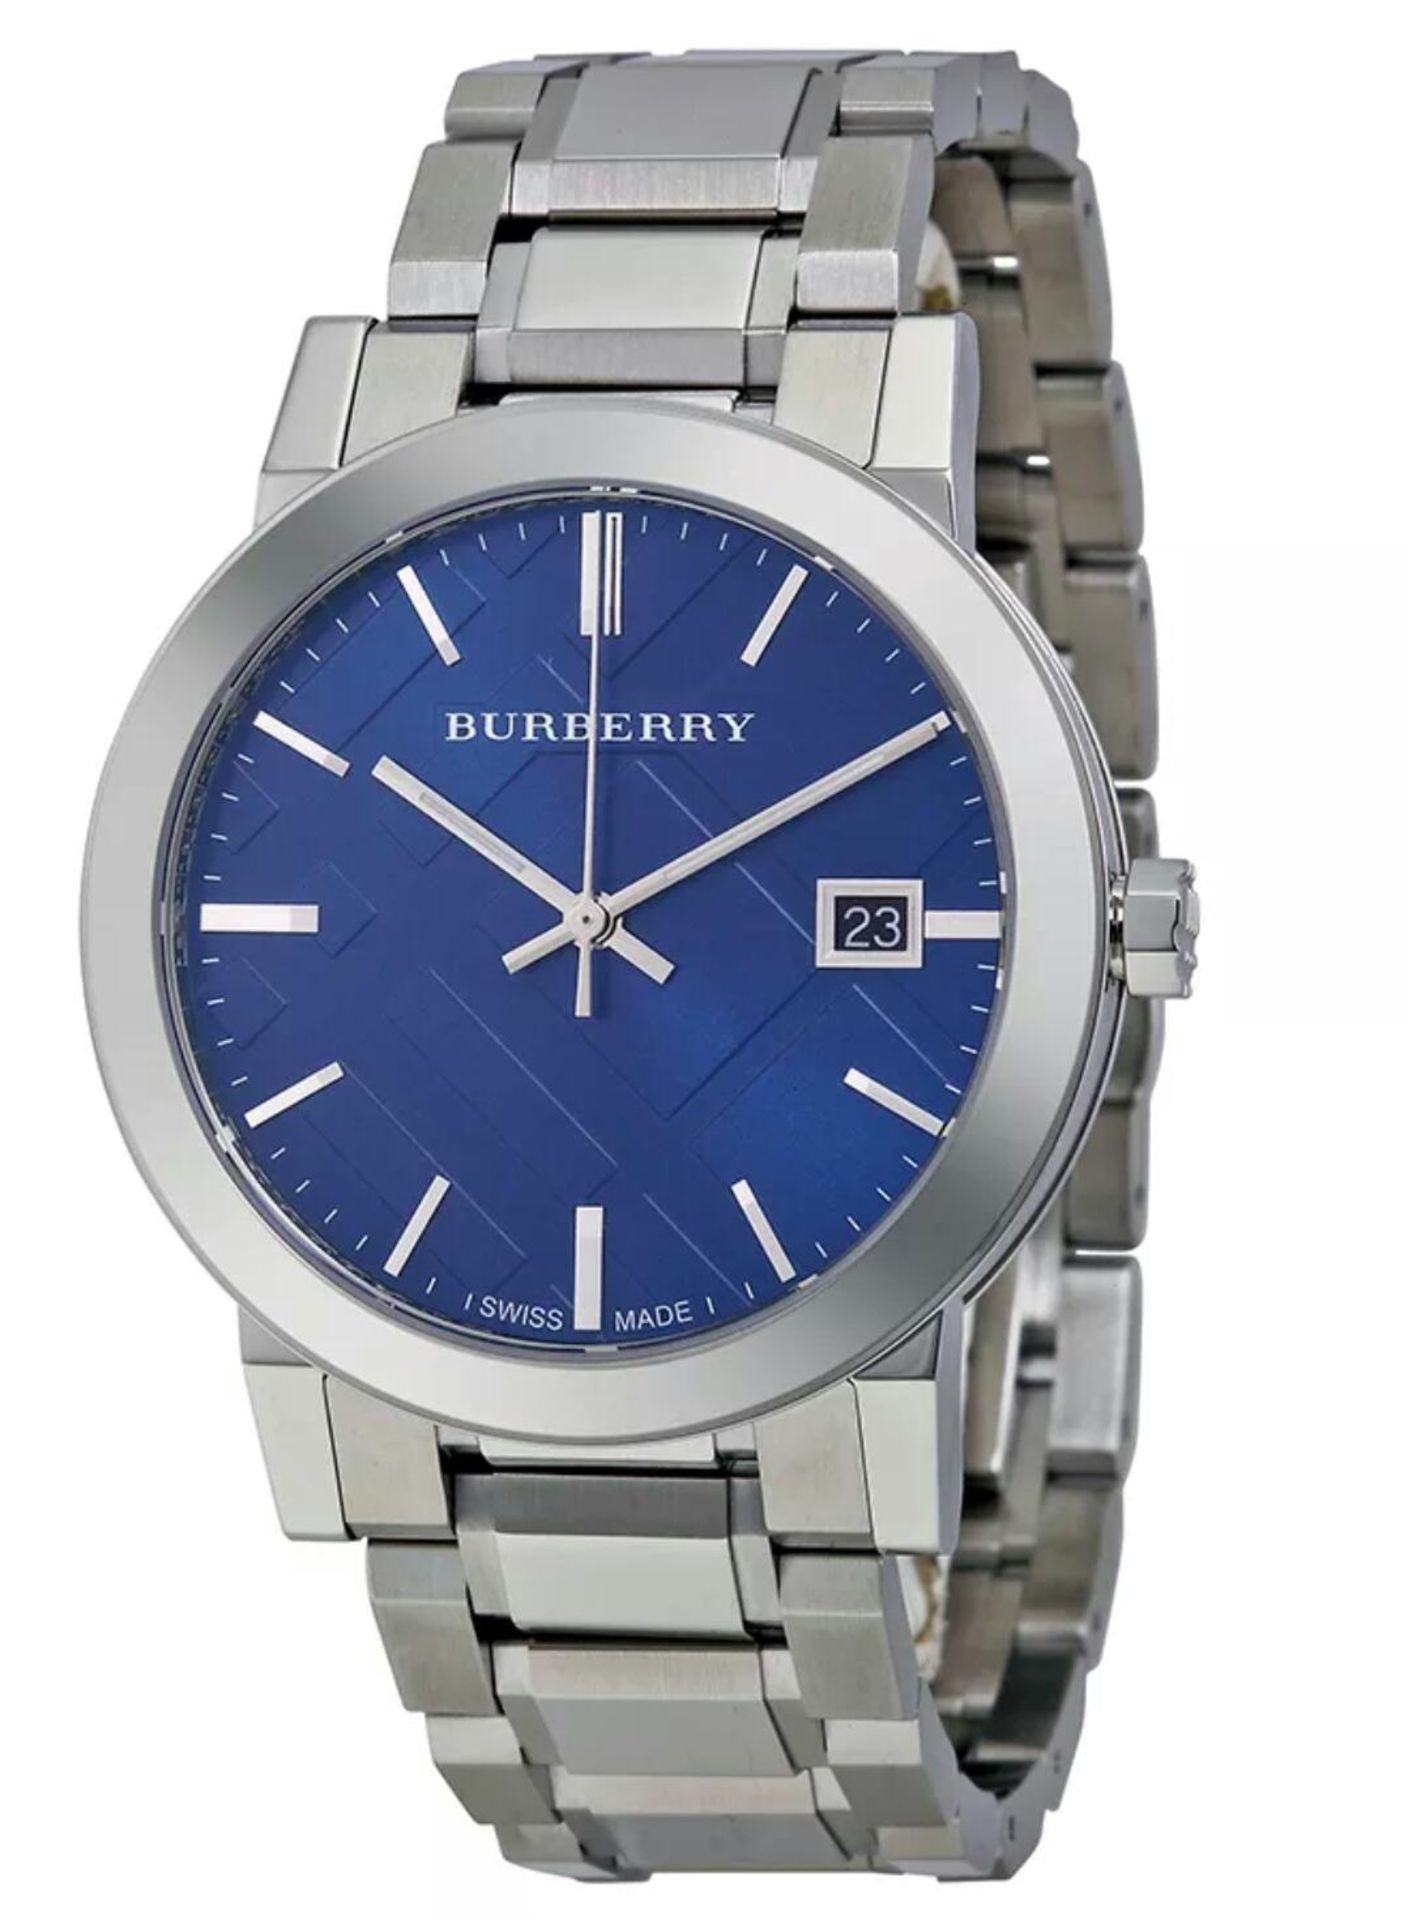 BRAND NEW GENTS BURBERRY WATCH, BU9031, COMPLETE WITH ORIGINAL BOX AND MANUAL - RRP £399